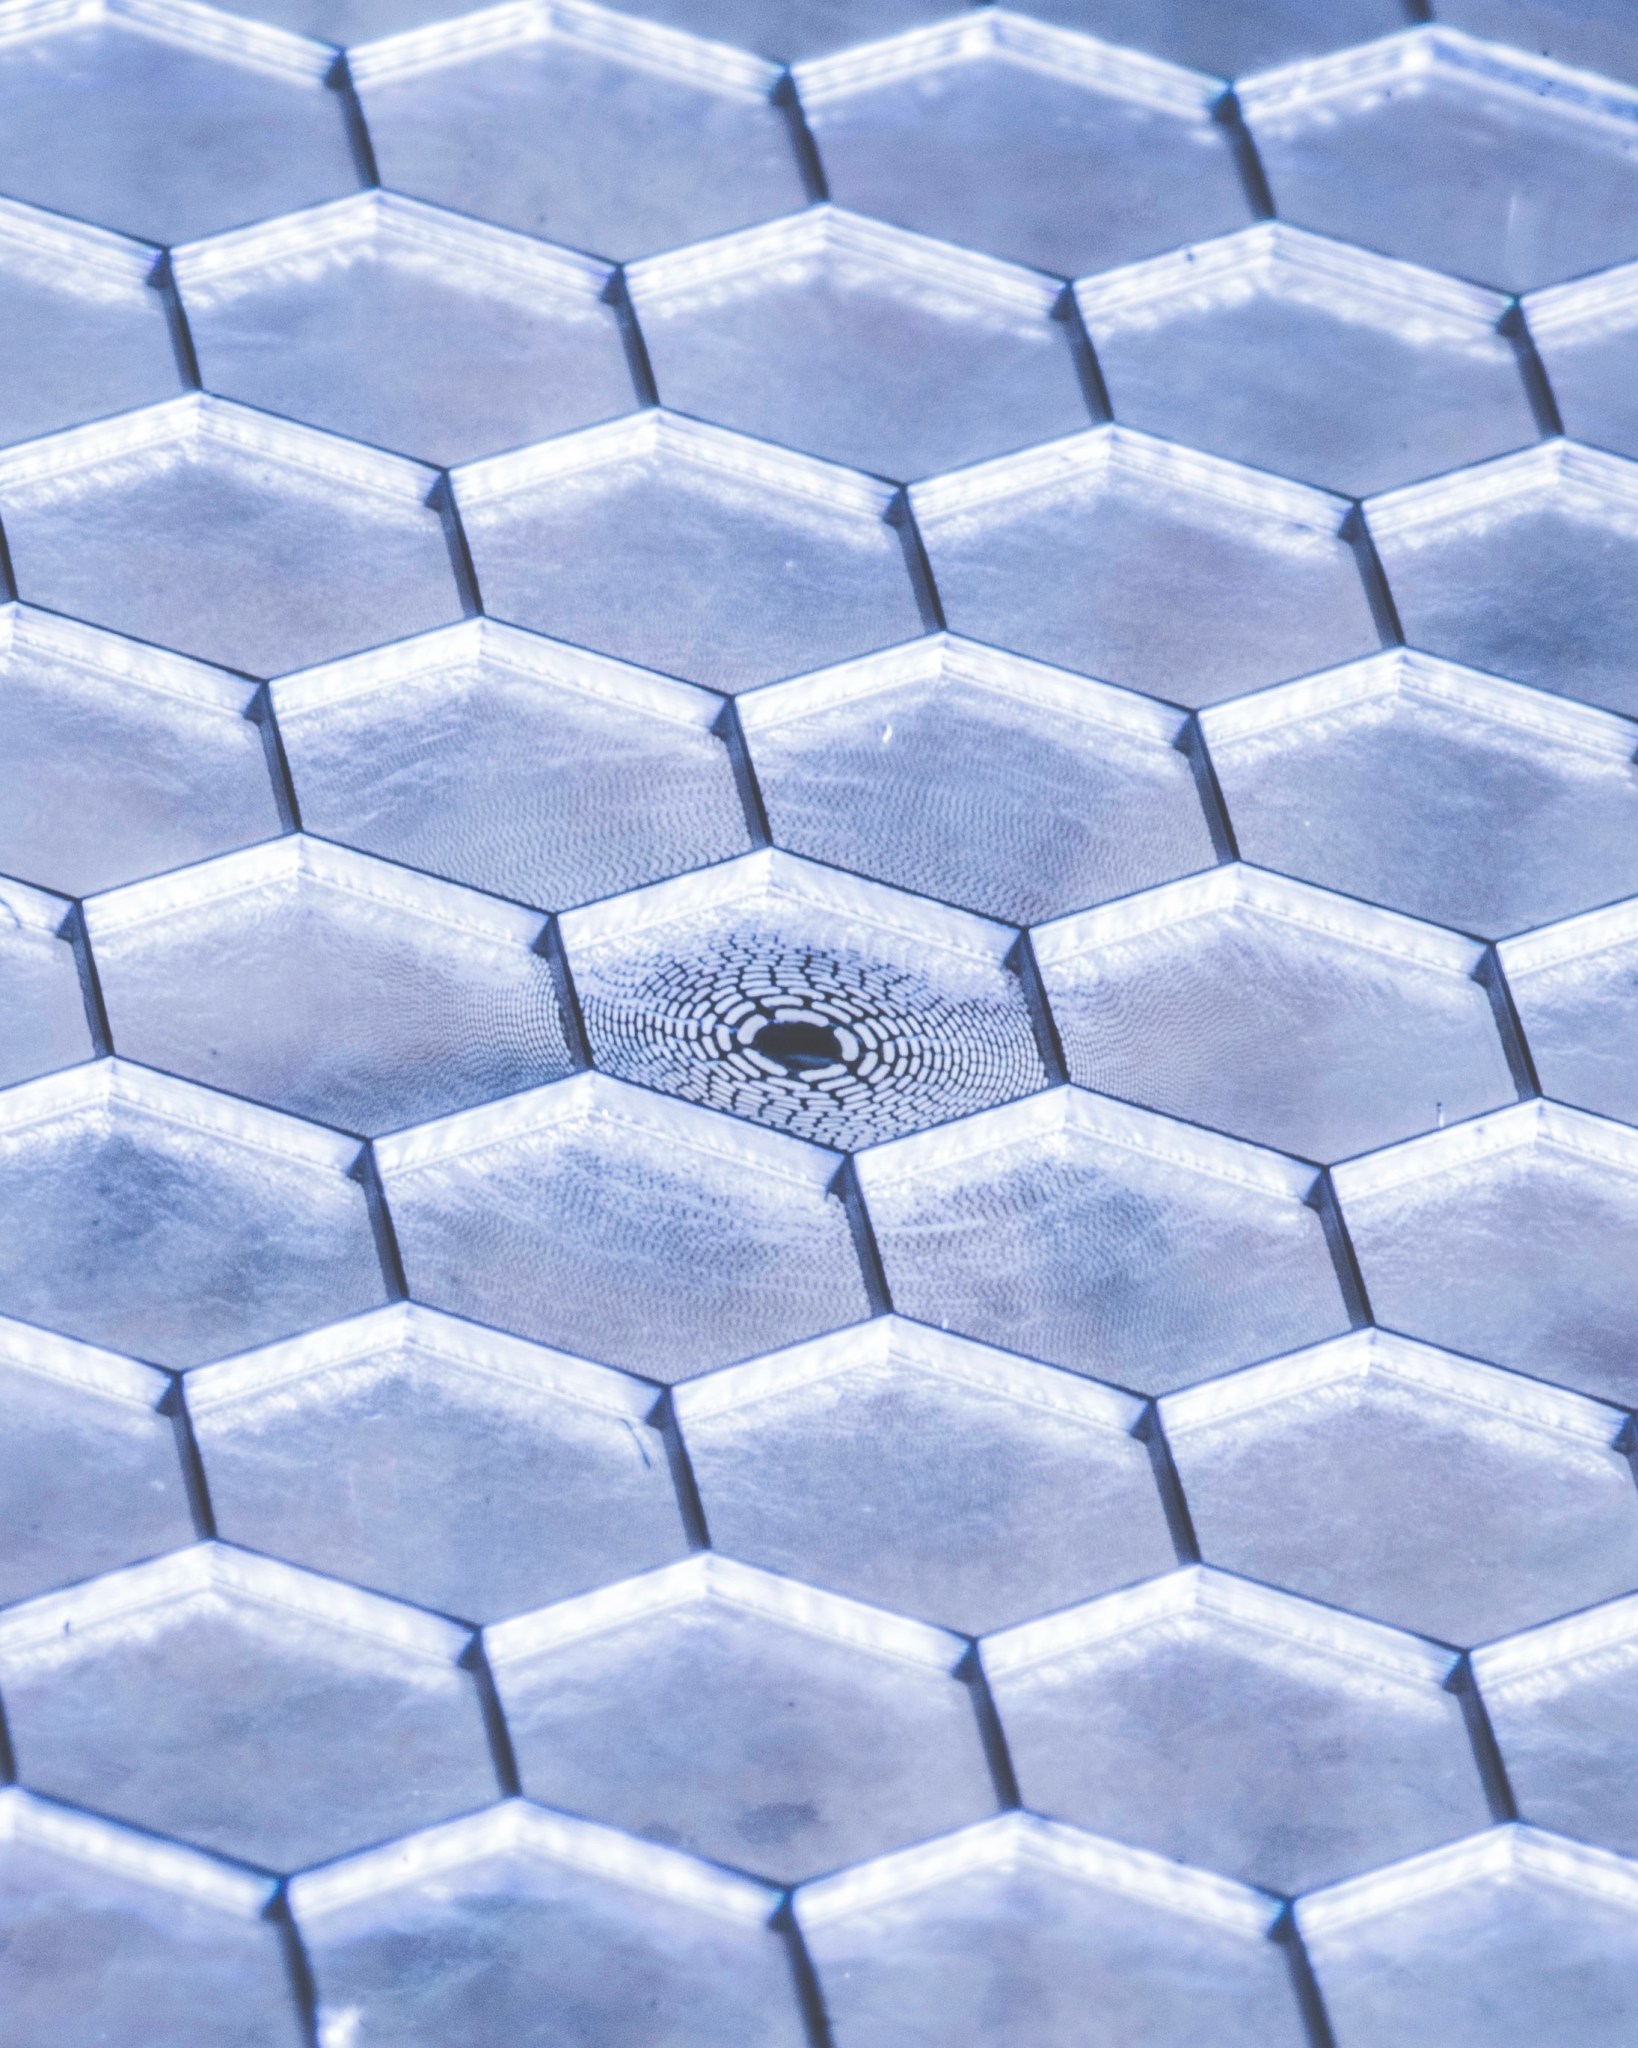 a honeycomb structure holds a photon sieve cut to focus extreme uv light